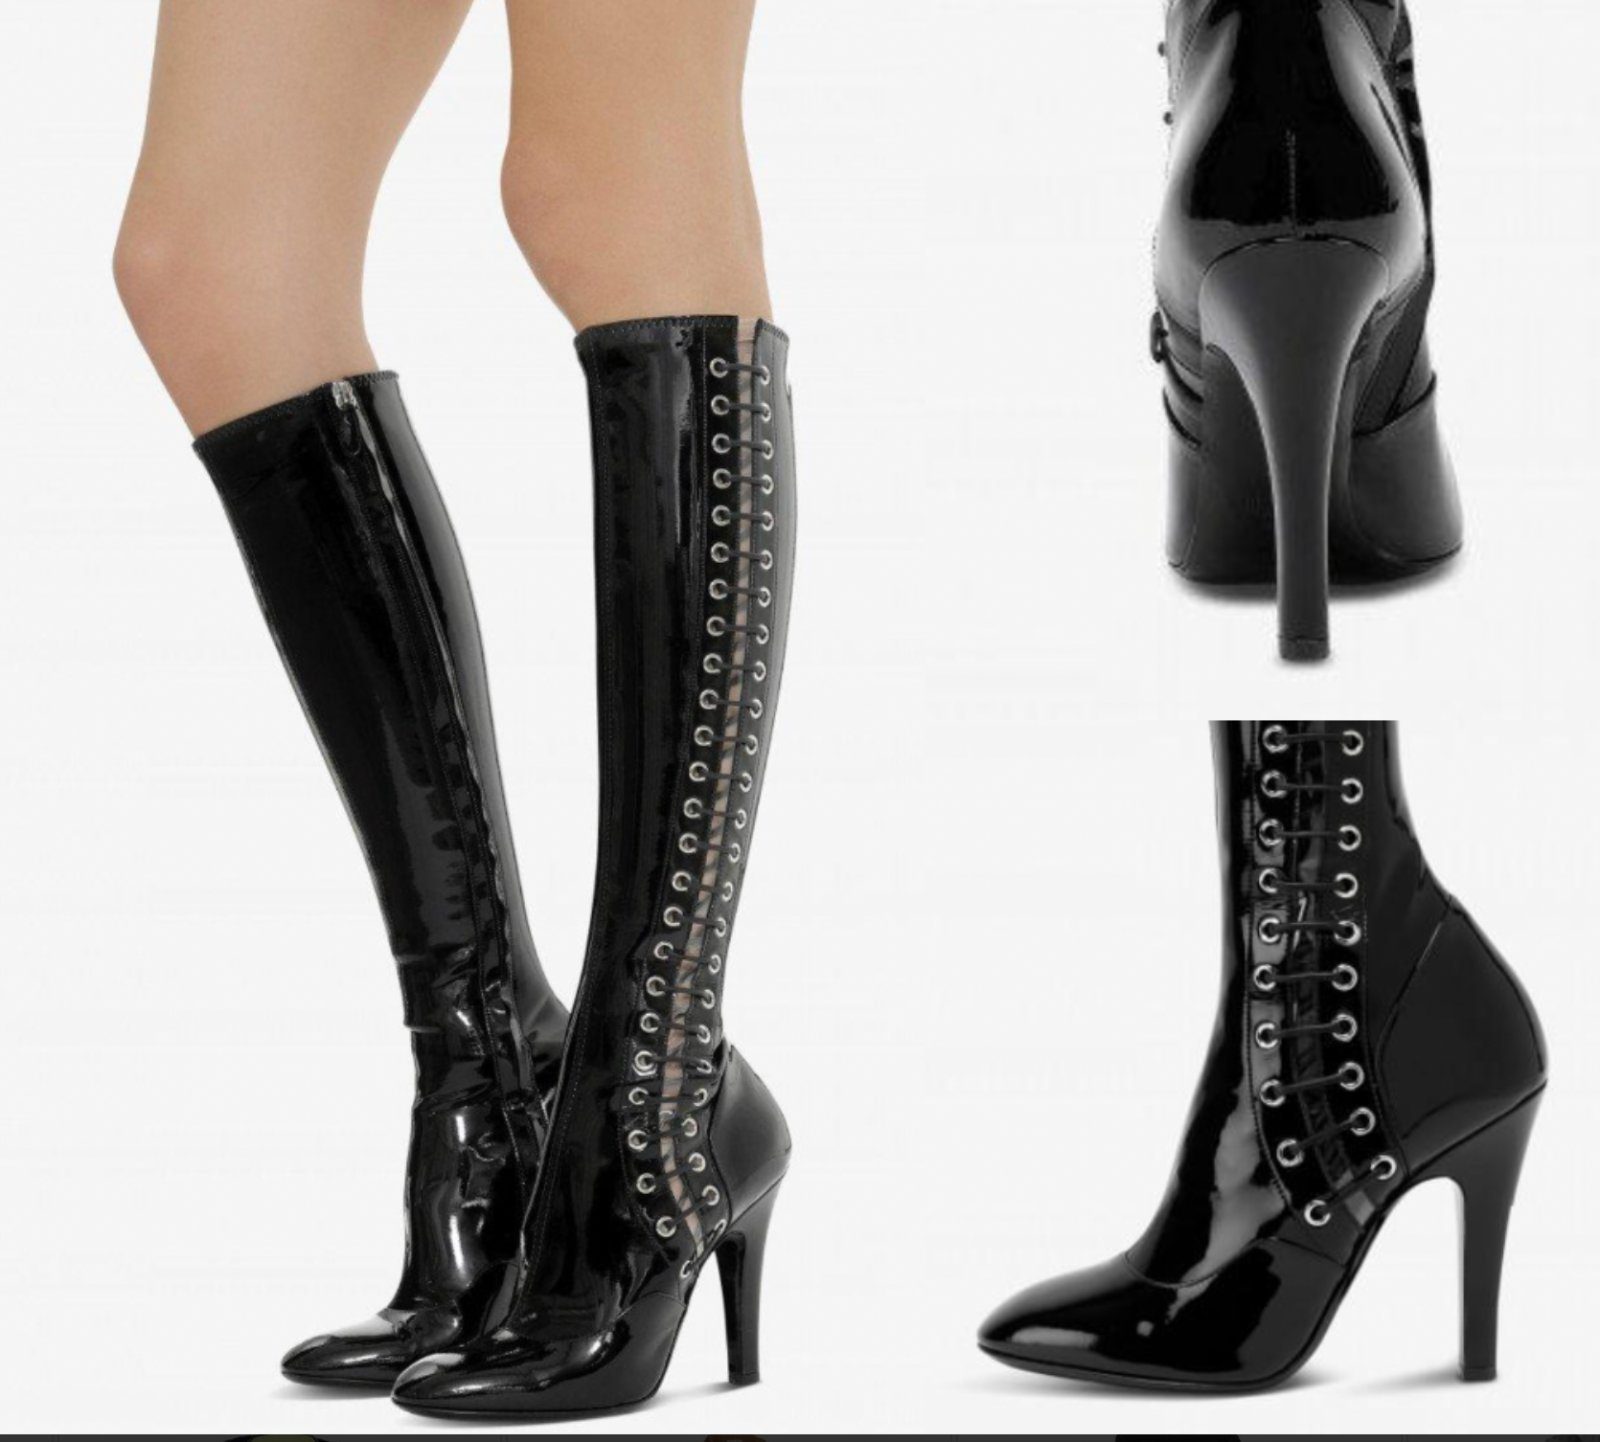 Moschino Iconic Latex Catwalk Overkneestiefel Punk Knee Lace-up Stiefel High Boots